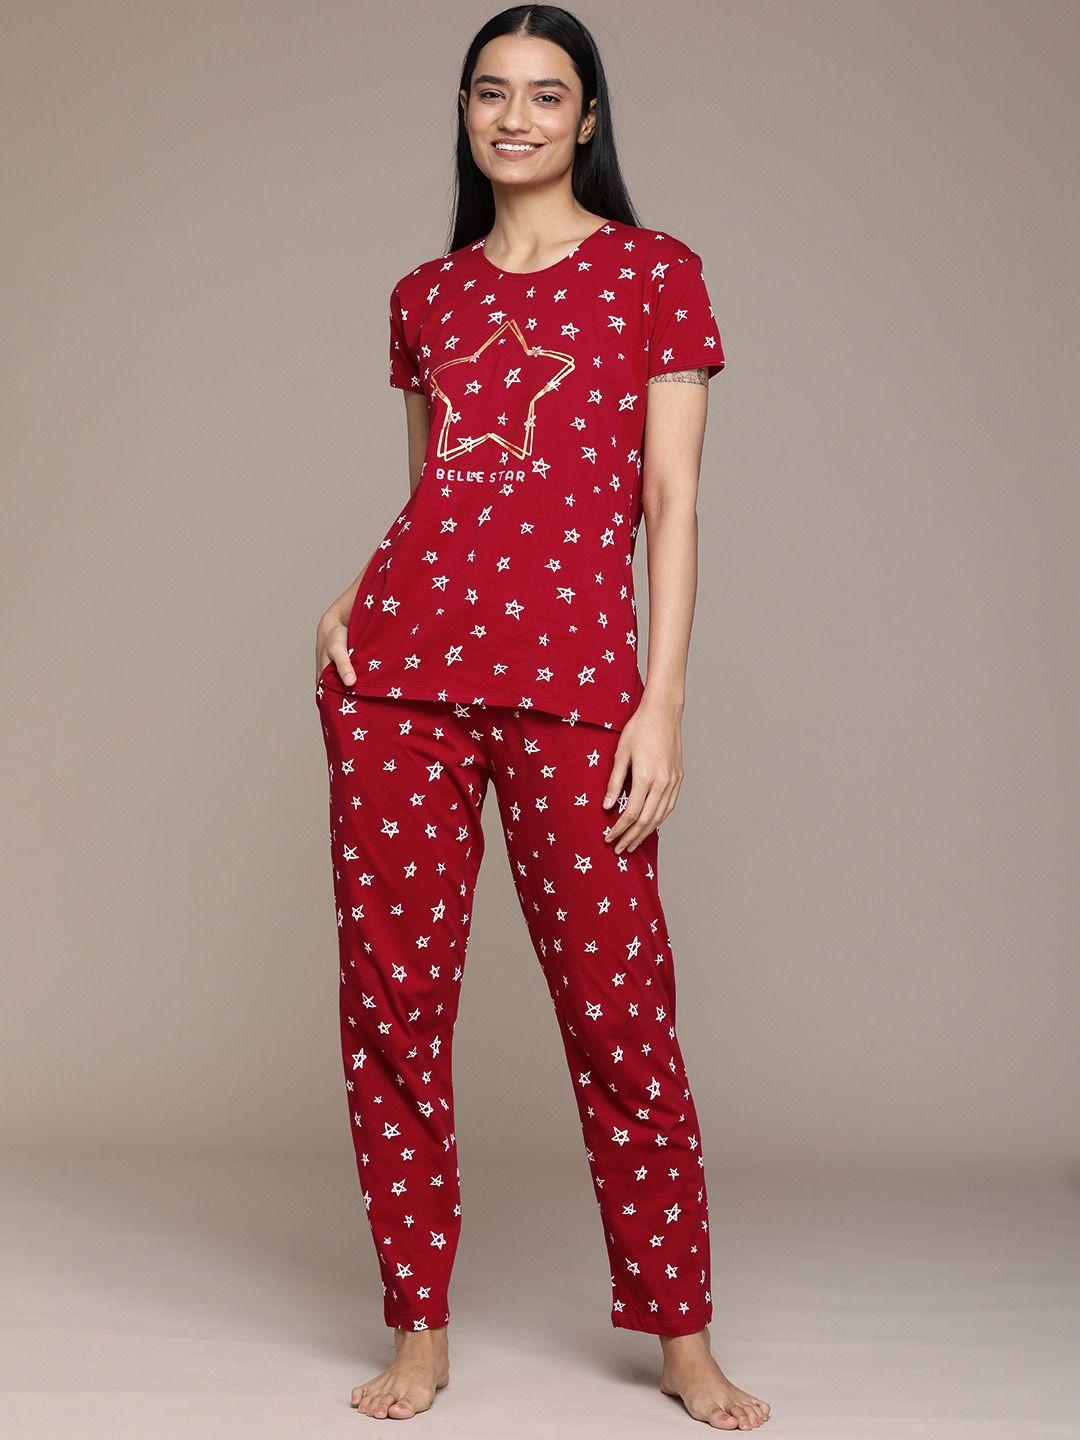 beebelle-women-maroon-&-white-printed-pure-cotton-night-suit